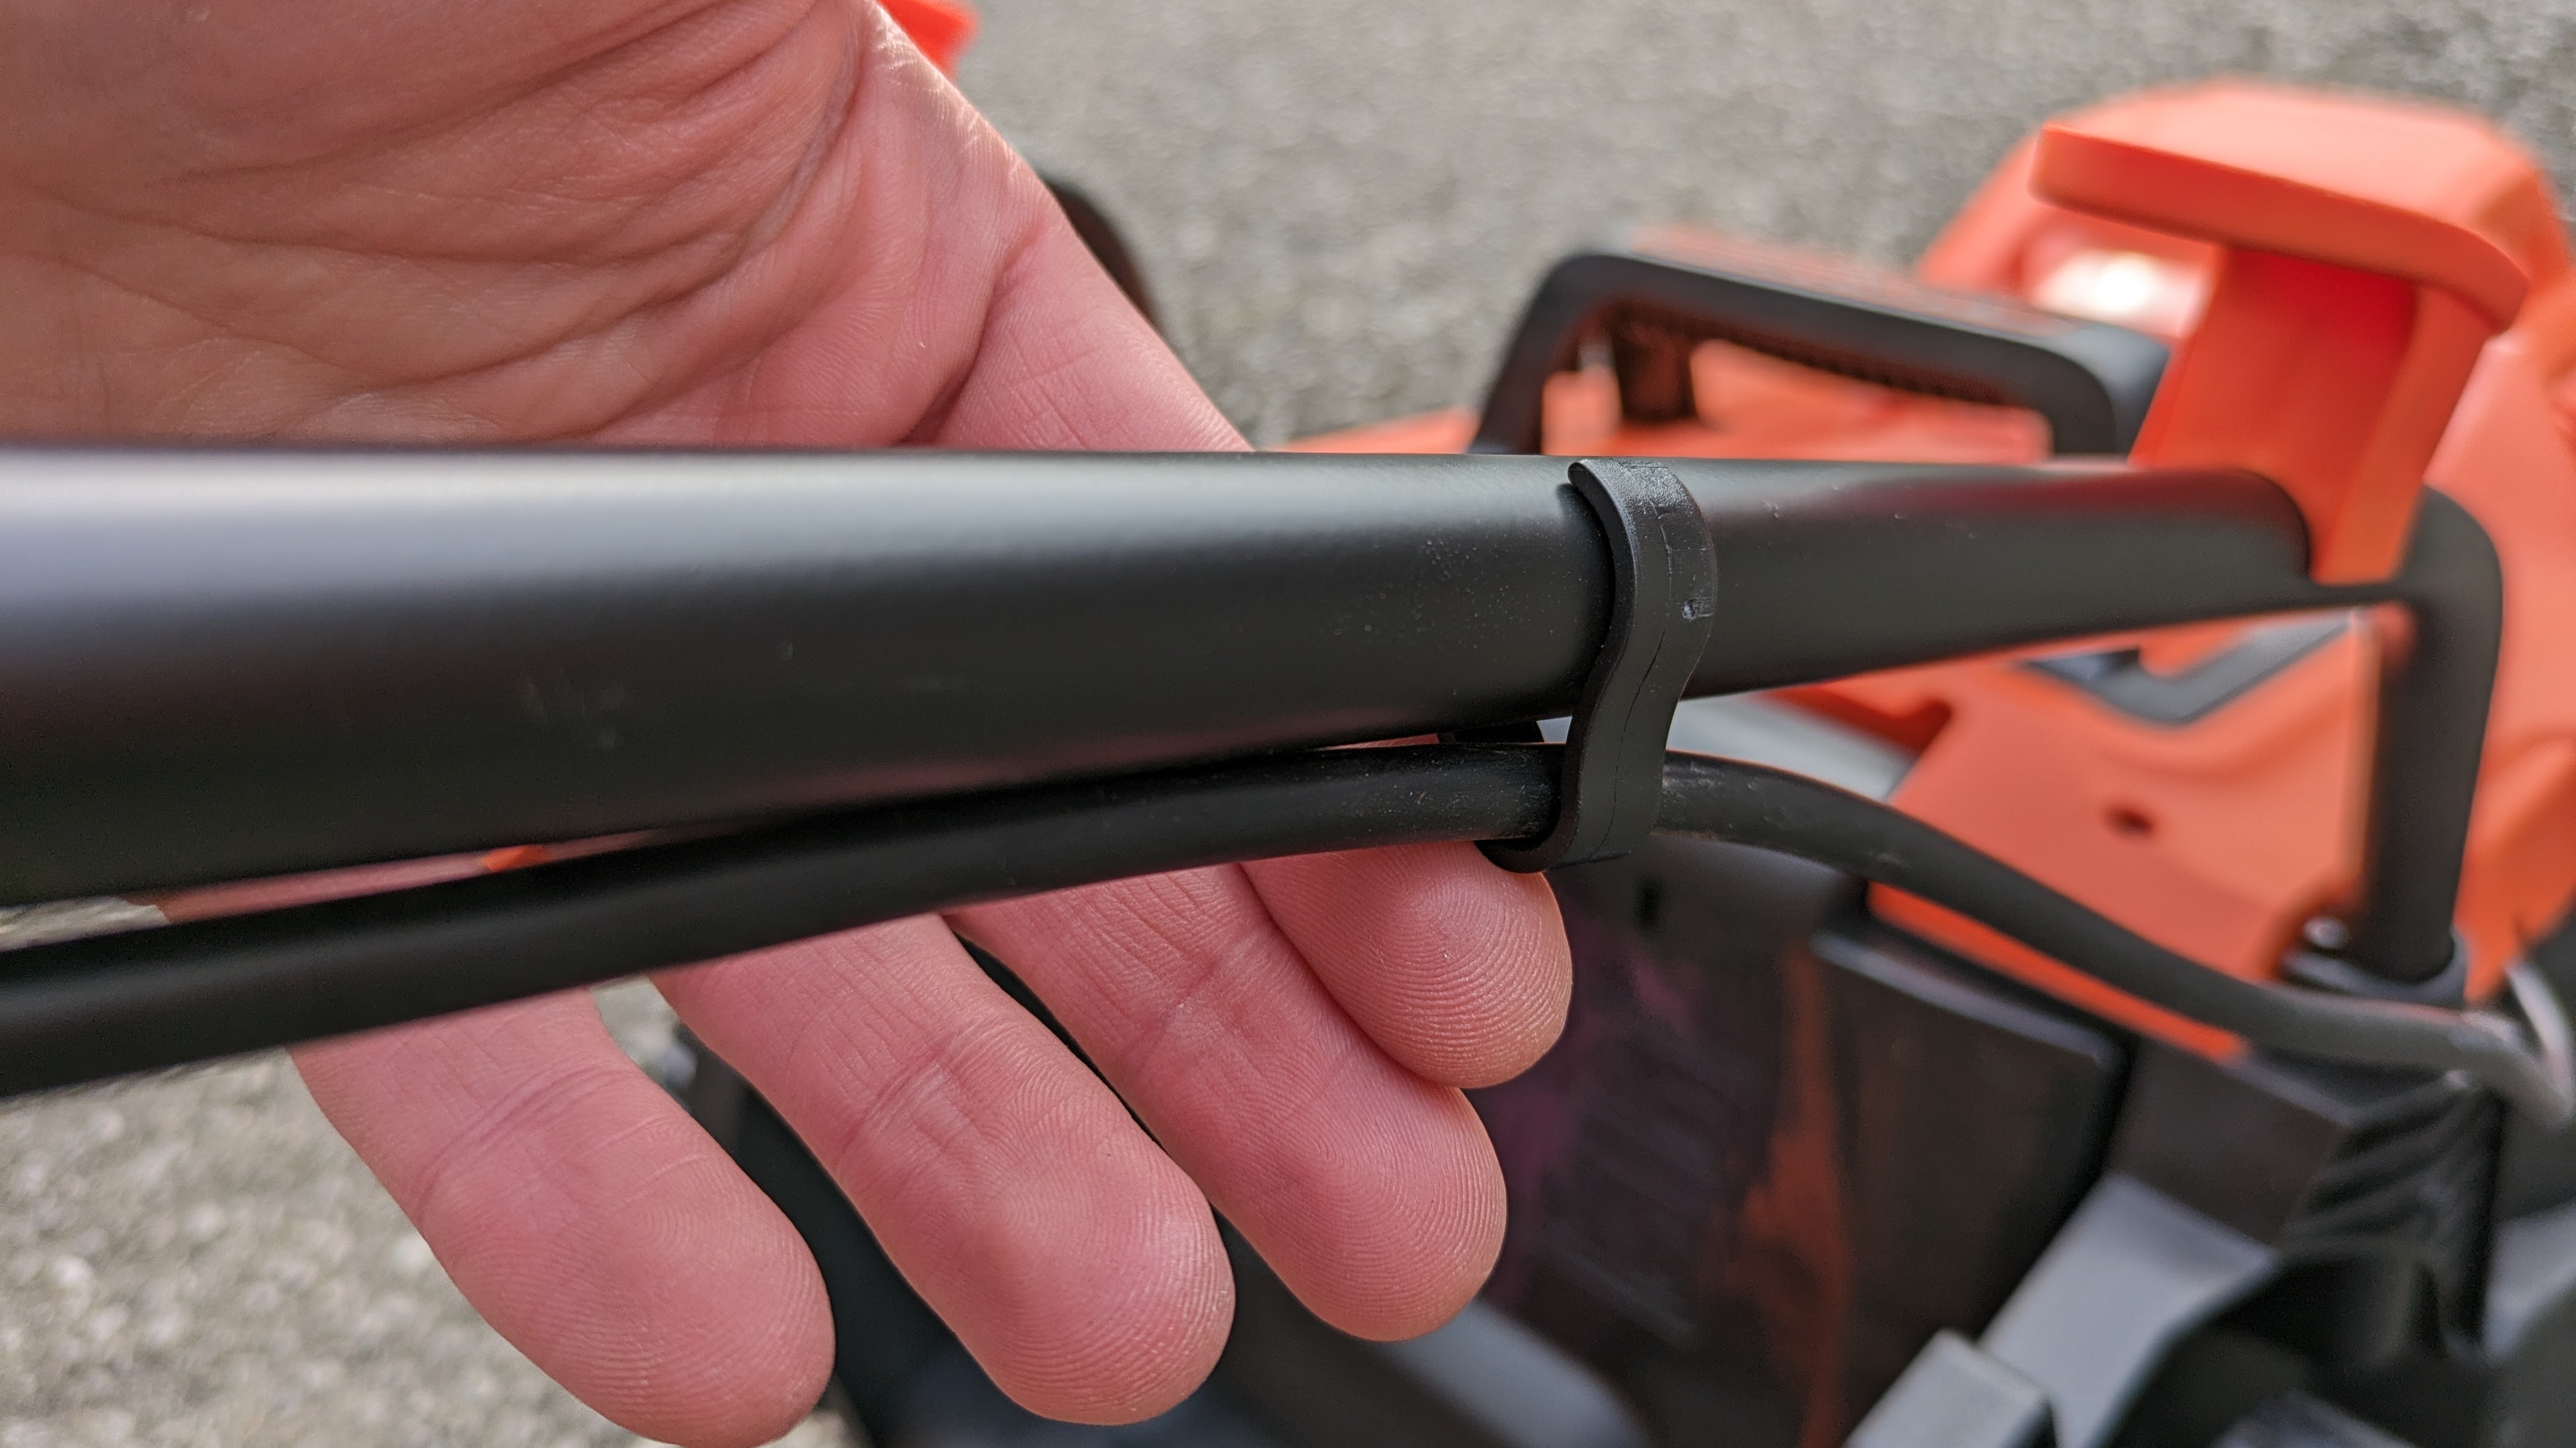 Attaching the cable management clips to the Black + Decker lawn mower.